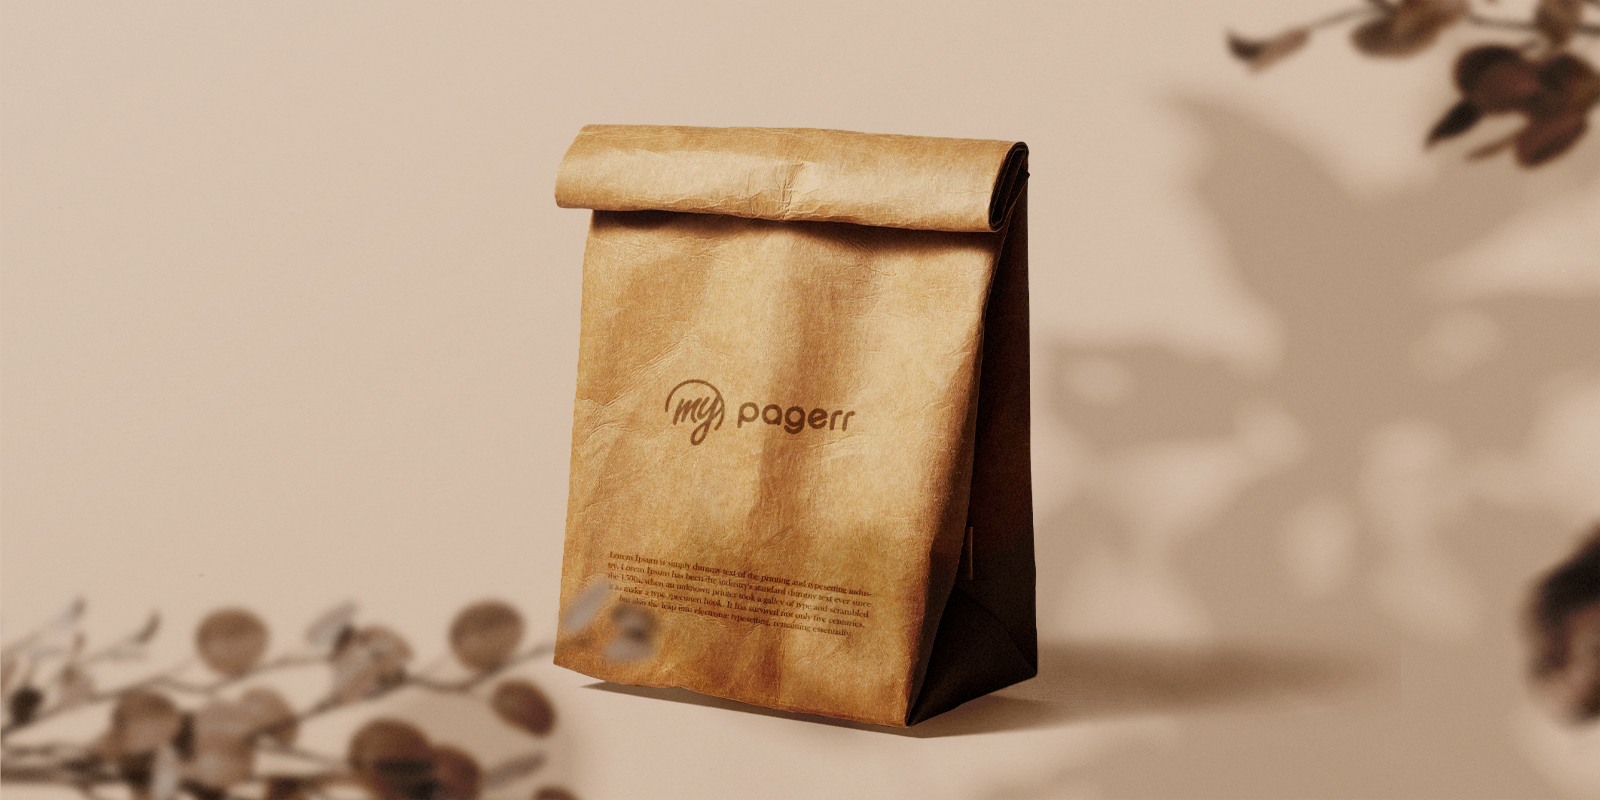 Kraft paper bags in Barcelona - Print with Pagerr